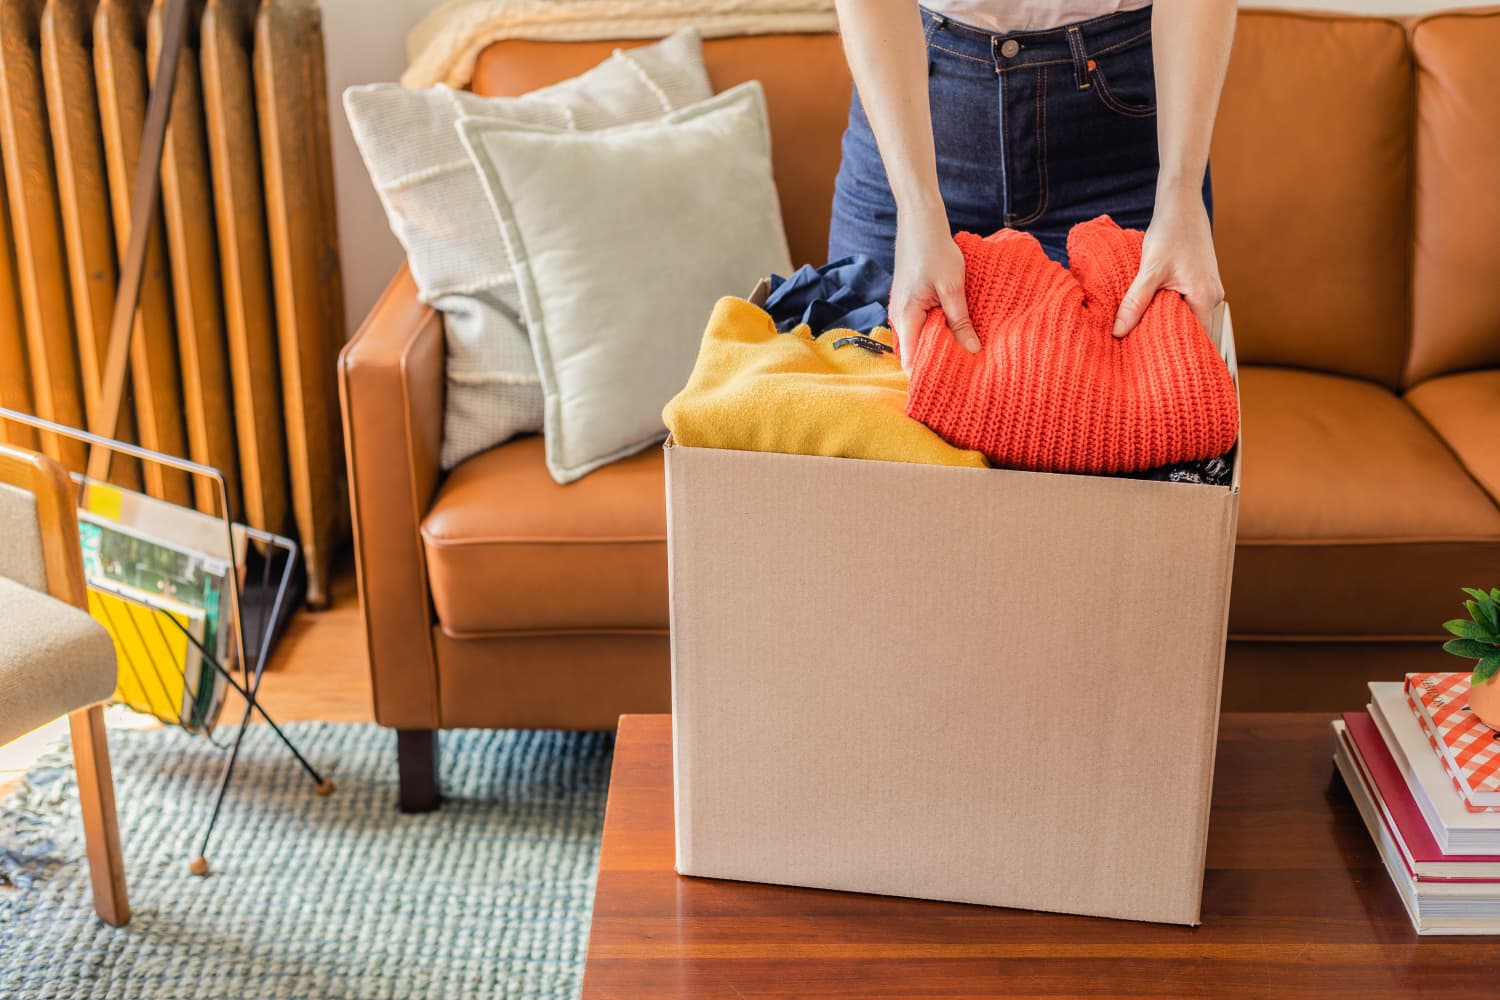 This Is How You Should Declutter Your Home (Especially If You Don’t Know Where to Start!)